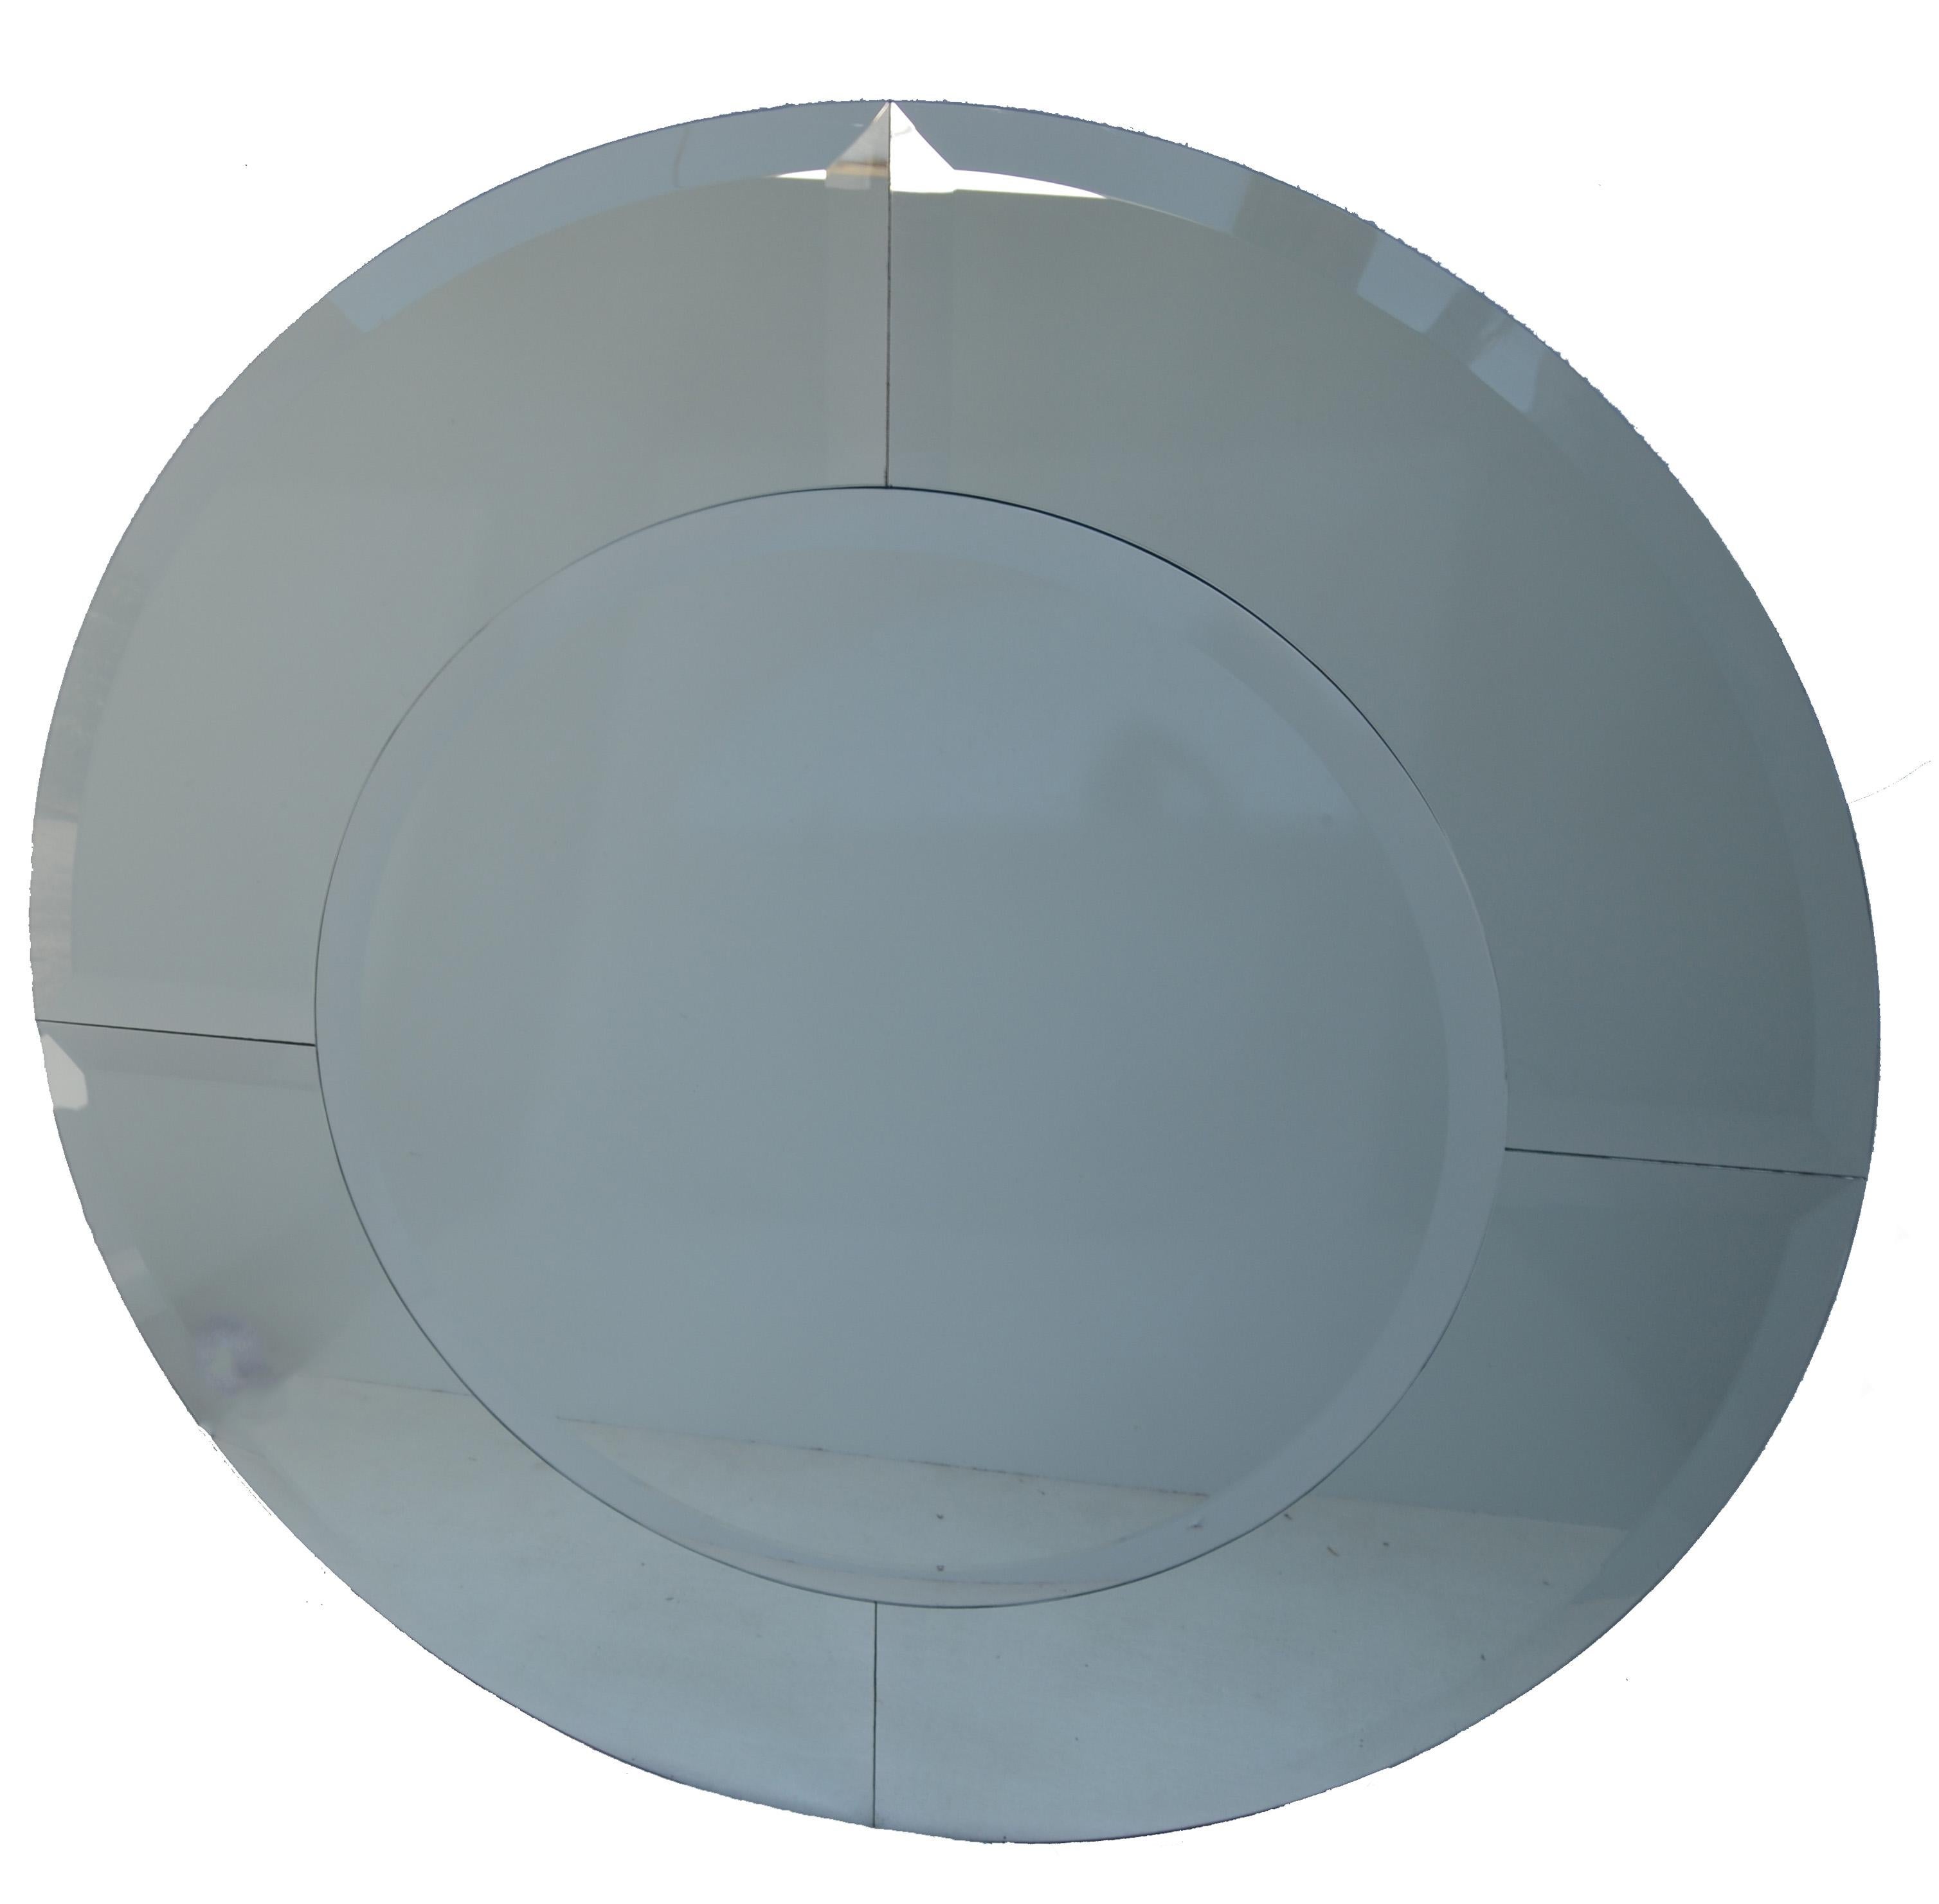 Pair of Karl Springer style Minimalist round saturn wall mirrors with 5 pieces of beveled Glass Panels mounted on a thick wood disc.
Mid-Century Modern Classic Craftsmanship in the style of Karl Springer made in America in the 1980.
Inside